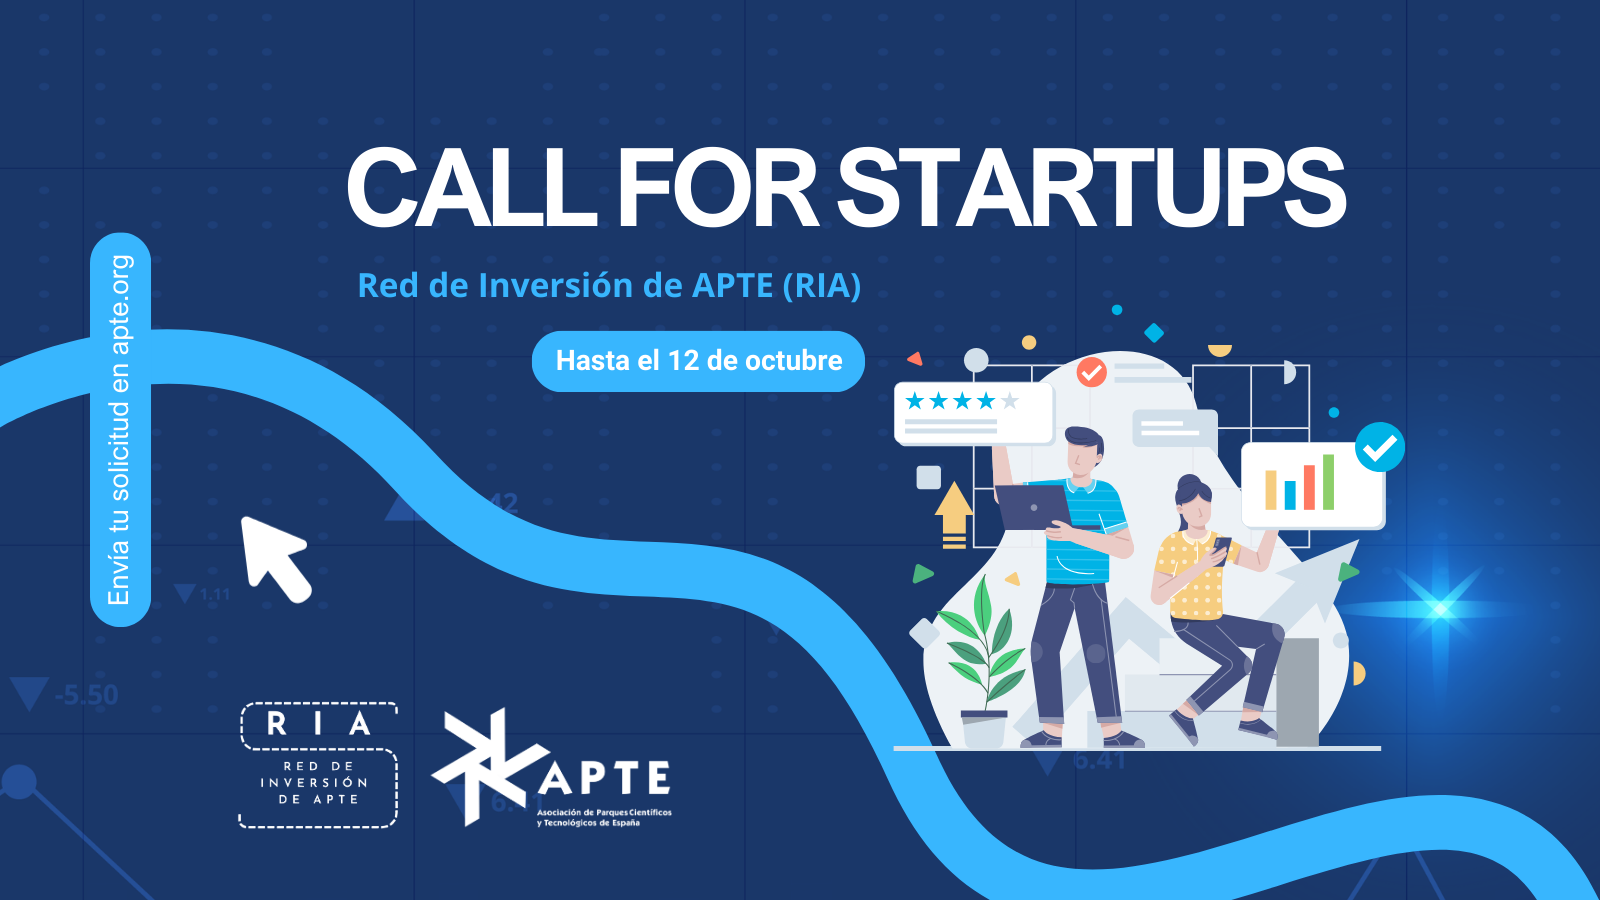 Diseno_Call_Red_inversion_startups_Web_y_Twitter